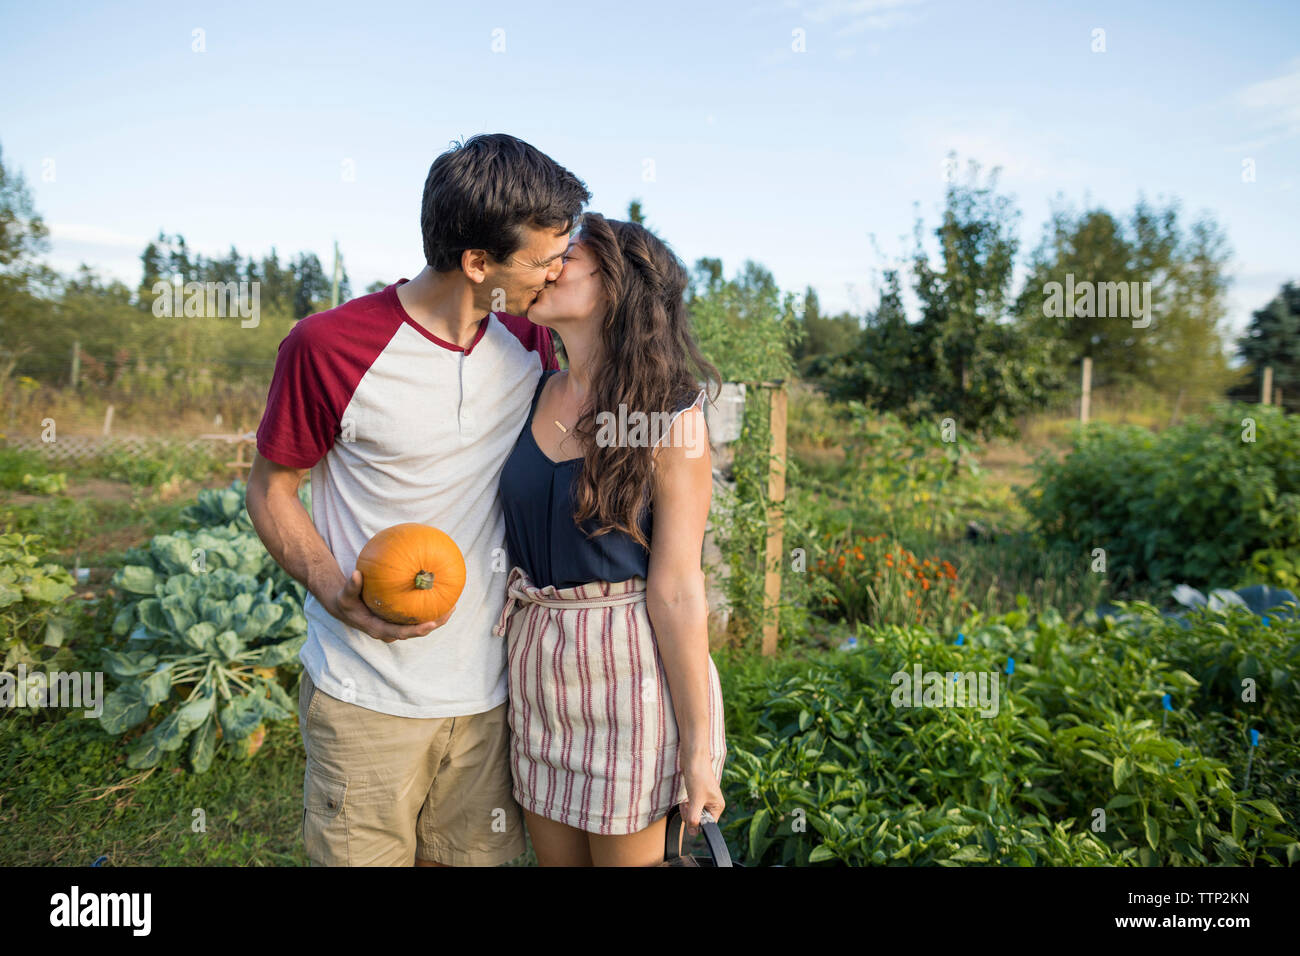 Young couple kissing while standing against sky at community garden Stock Photo